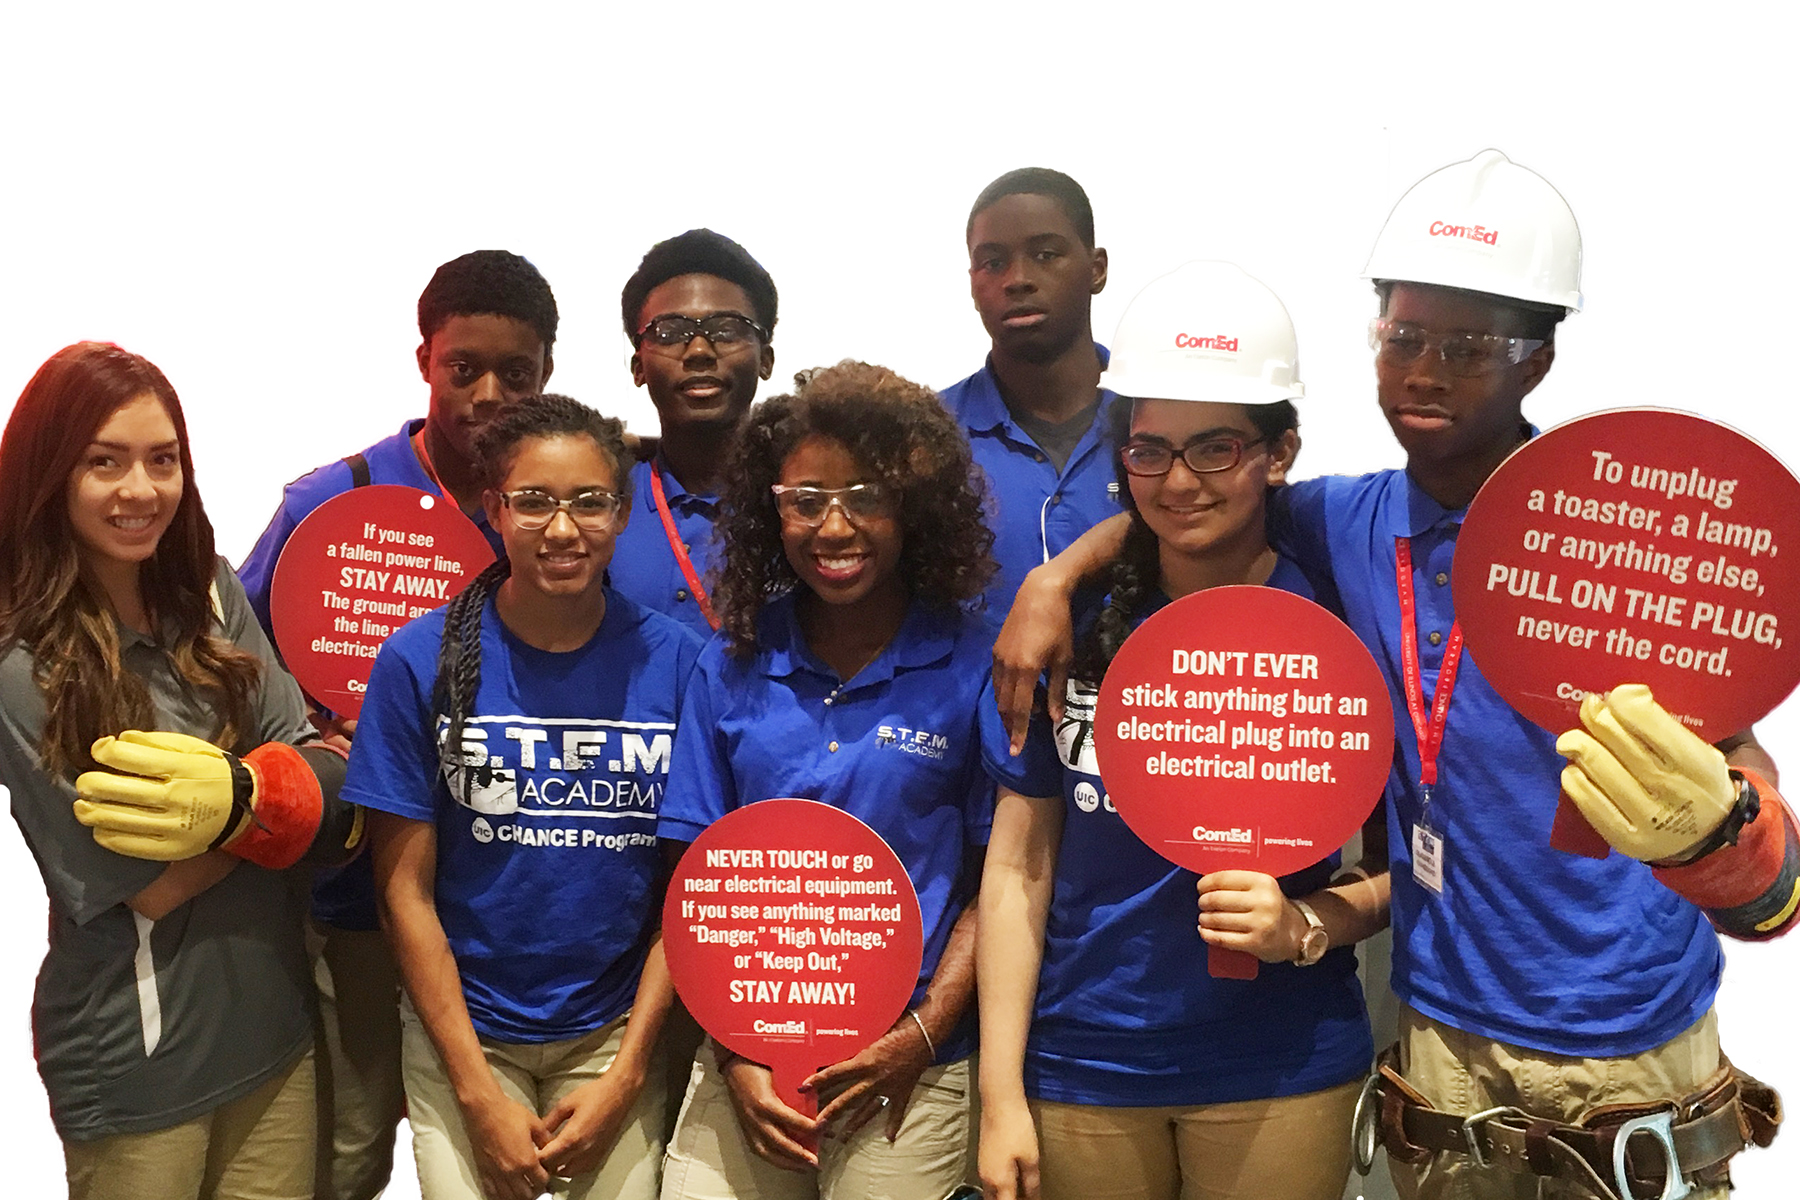 UIC hosts STEM Academy summer camp for high school students UIC today